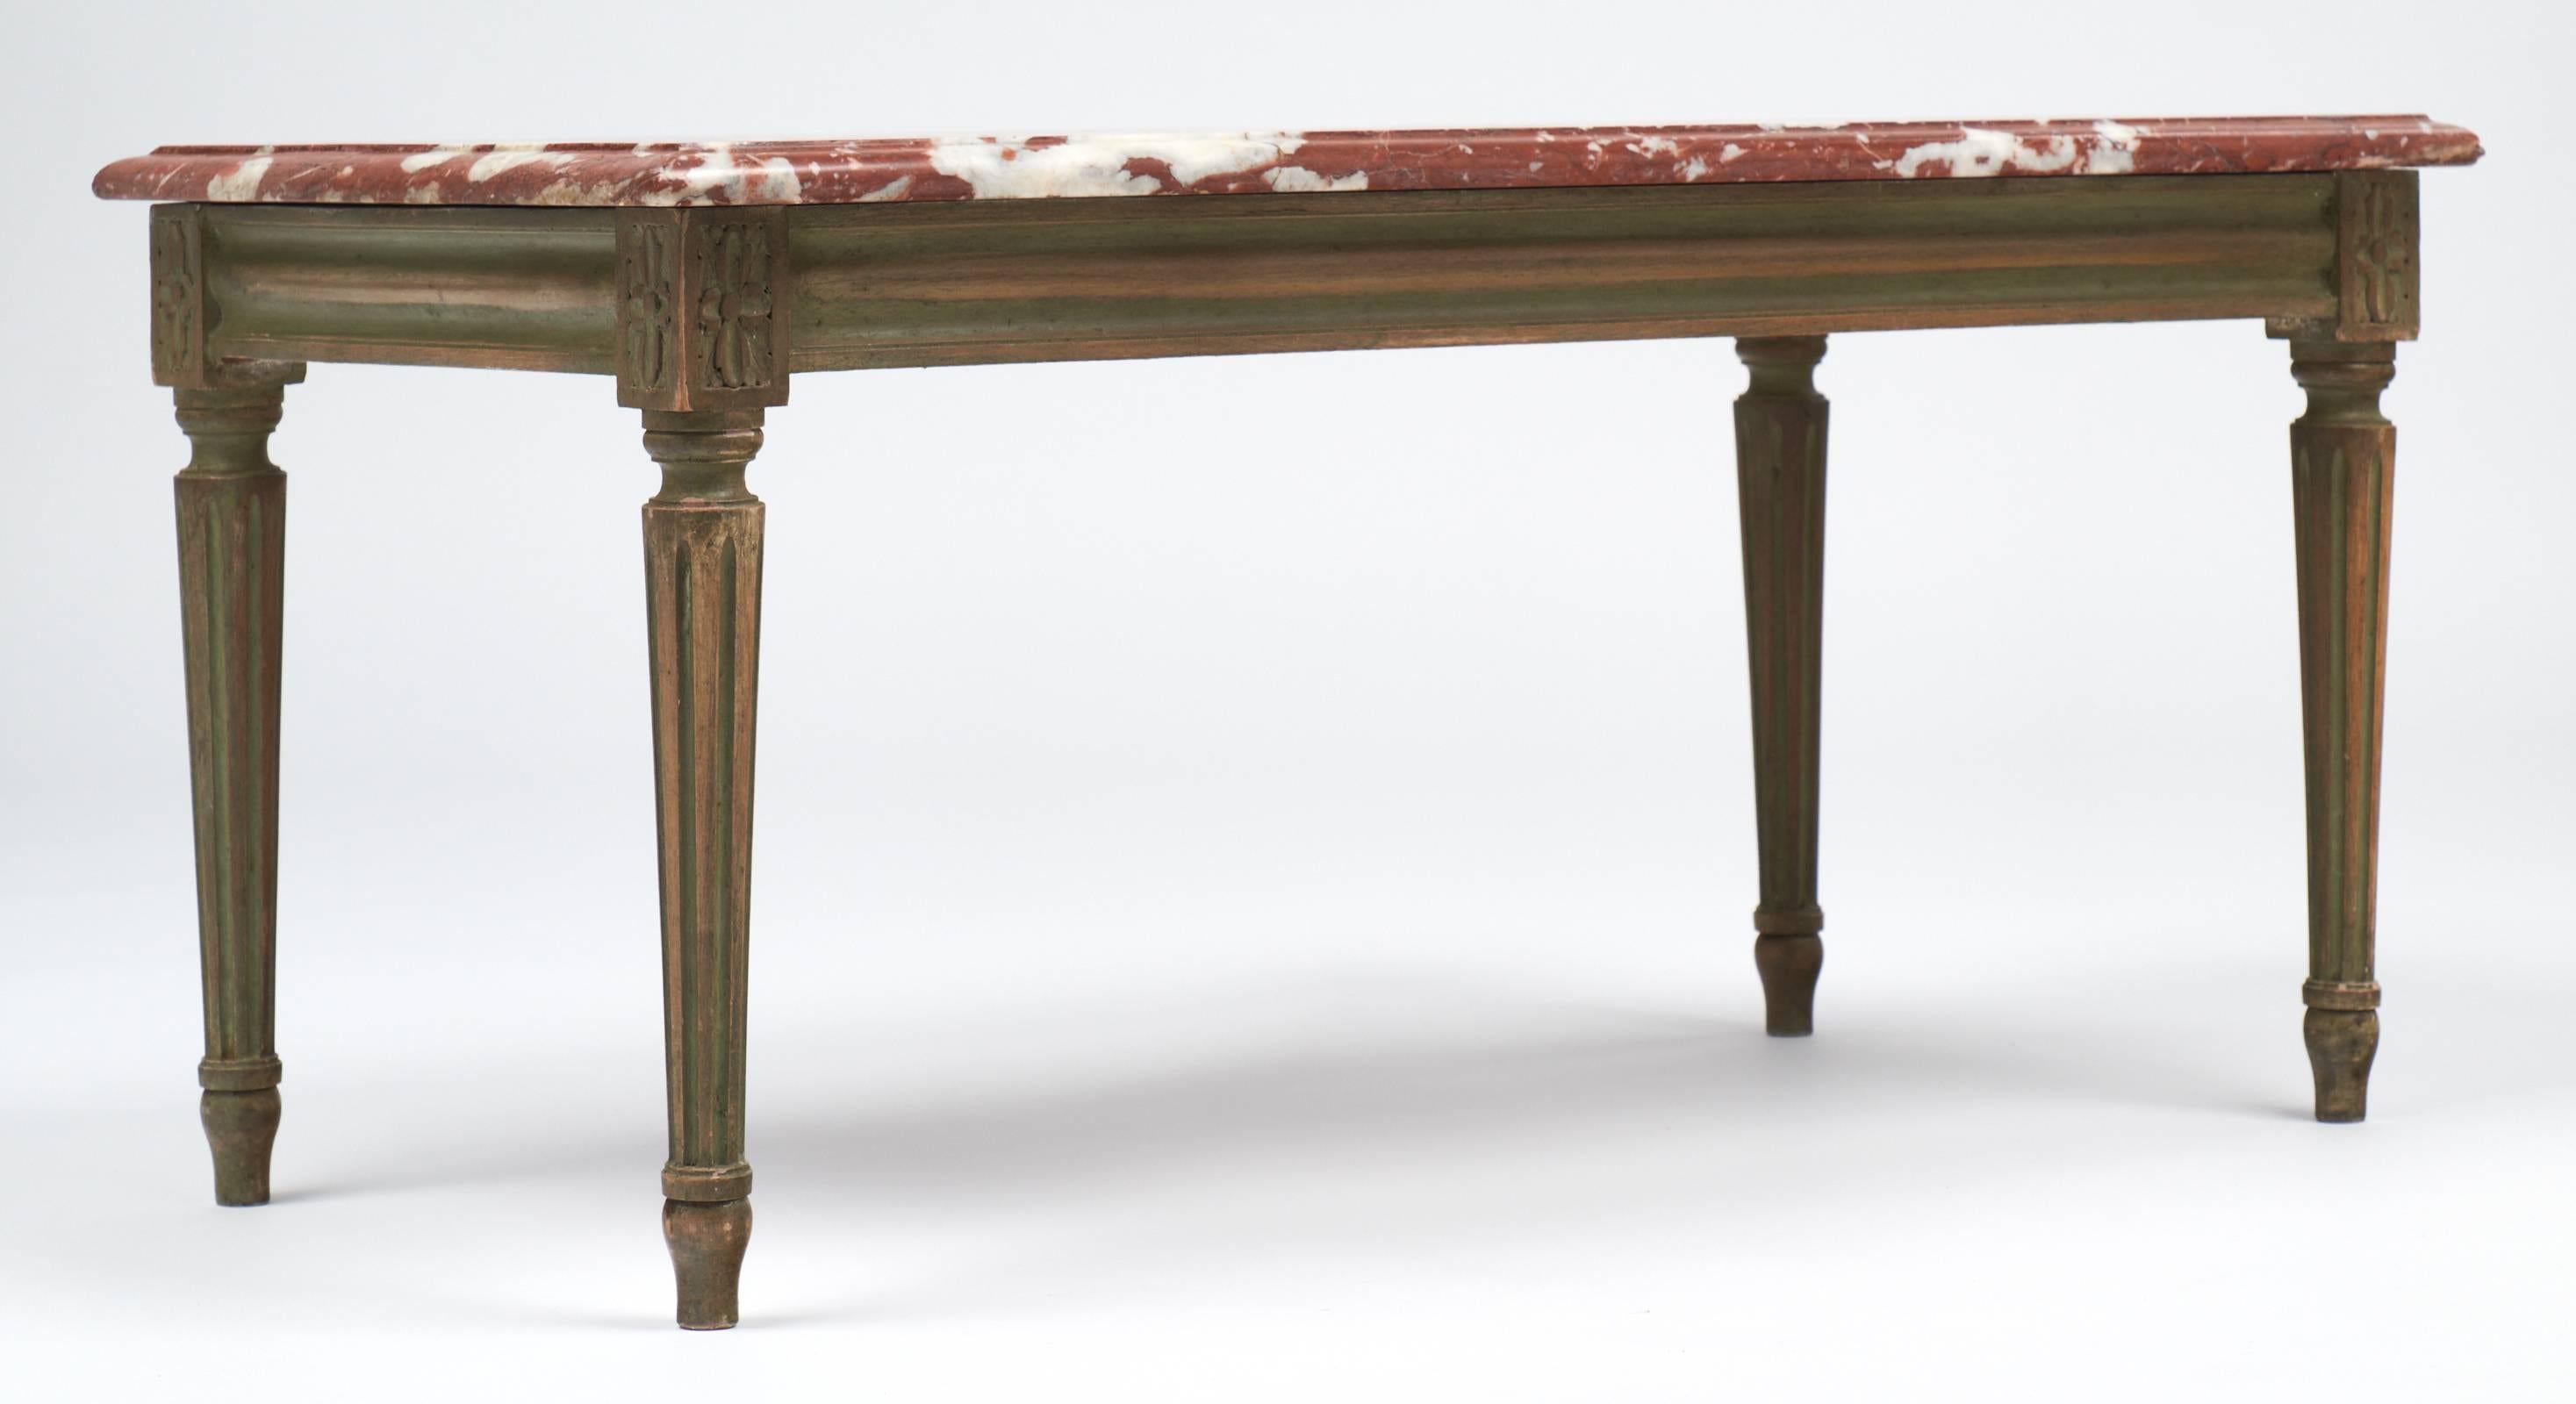 Great antique coffee table with carved and painted beech wood base and topped with rare 